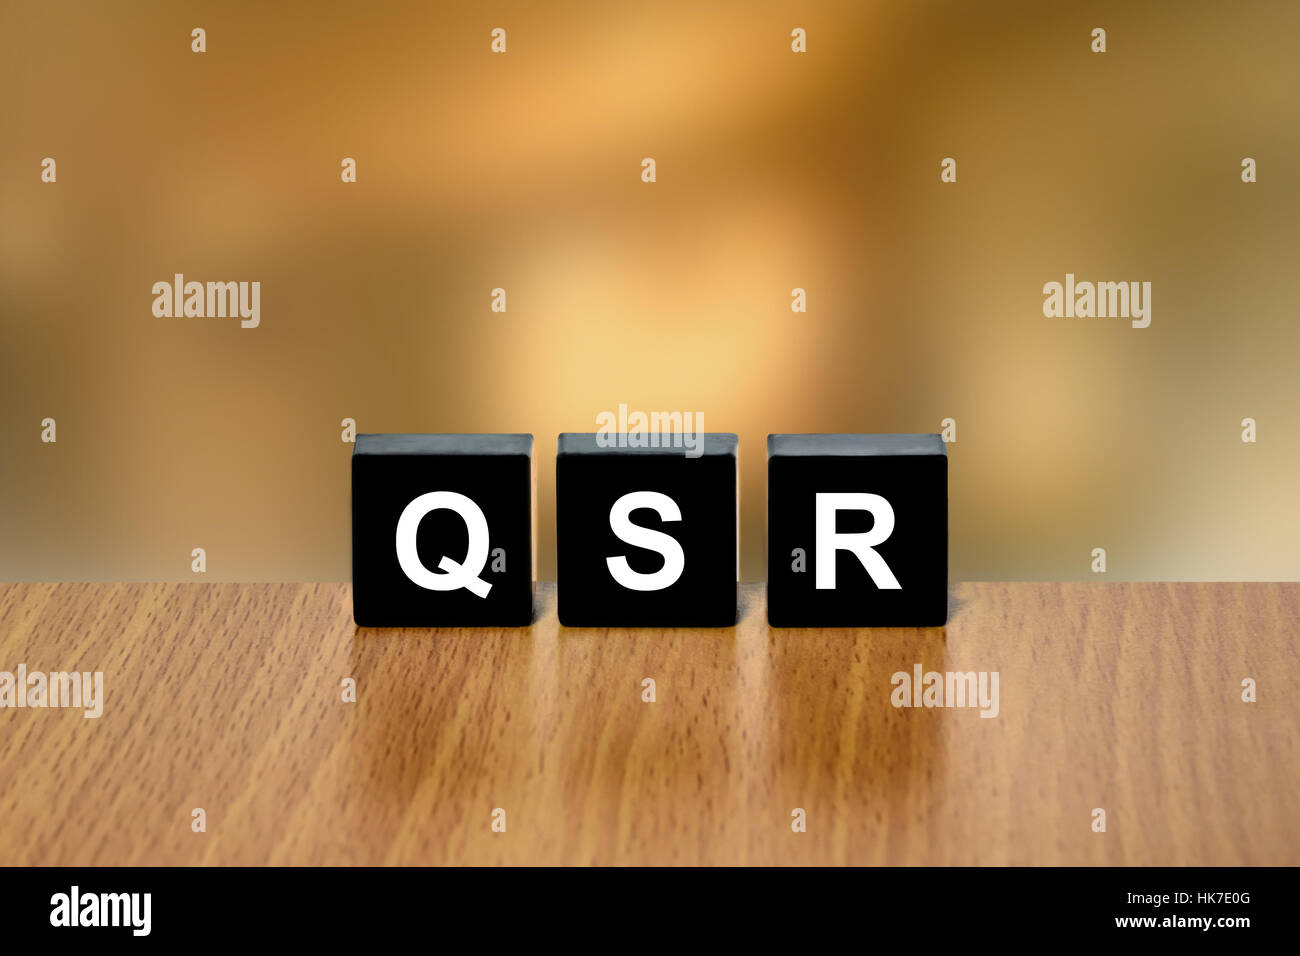 QSR or Quick service restaurant on black block with blurred background Stock Photo